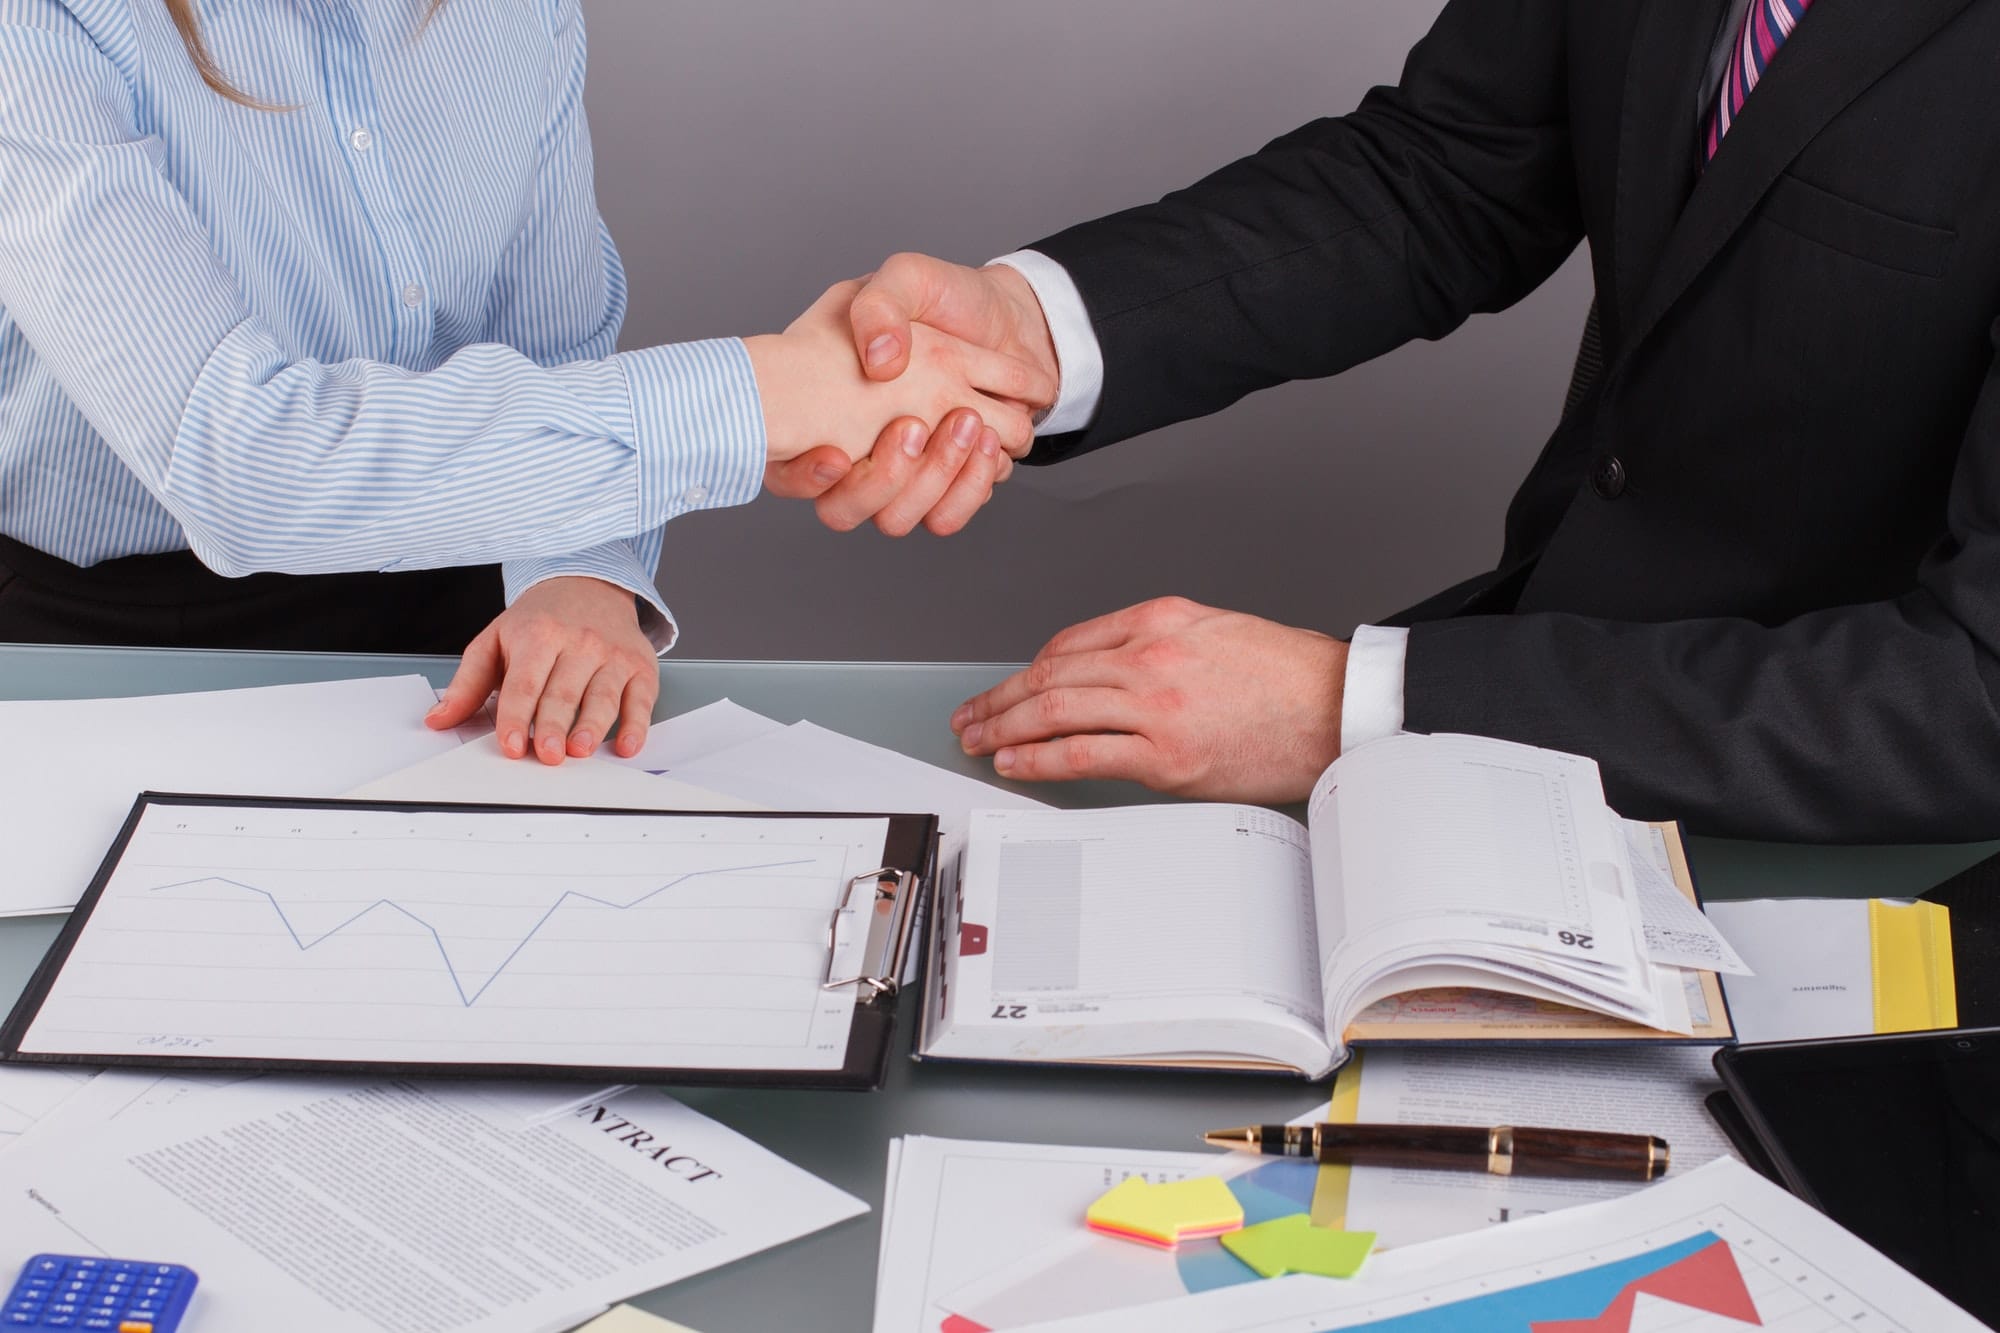 Close up of business handshake at meeting or negotiation above the desk in office.